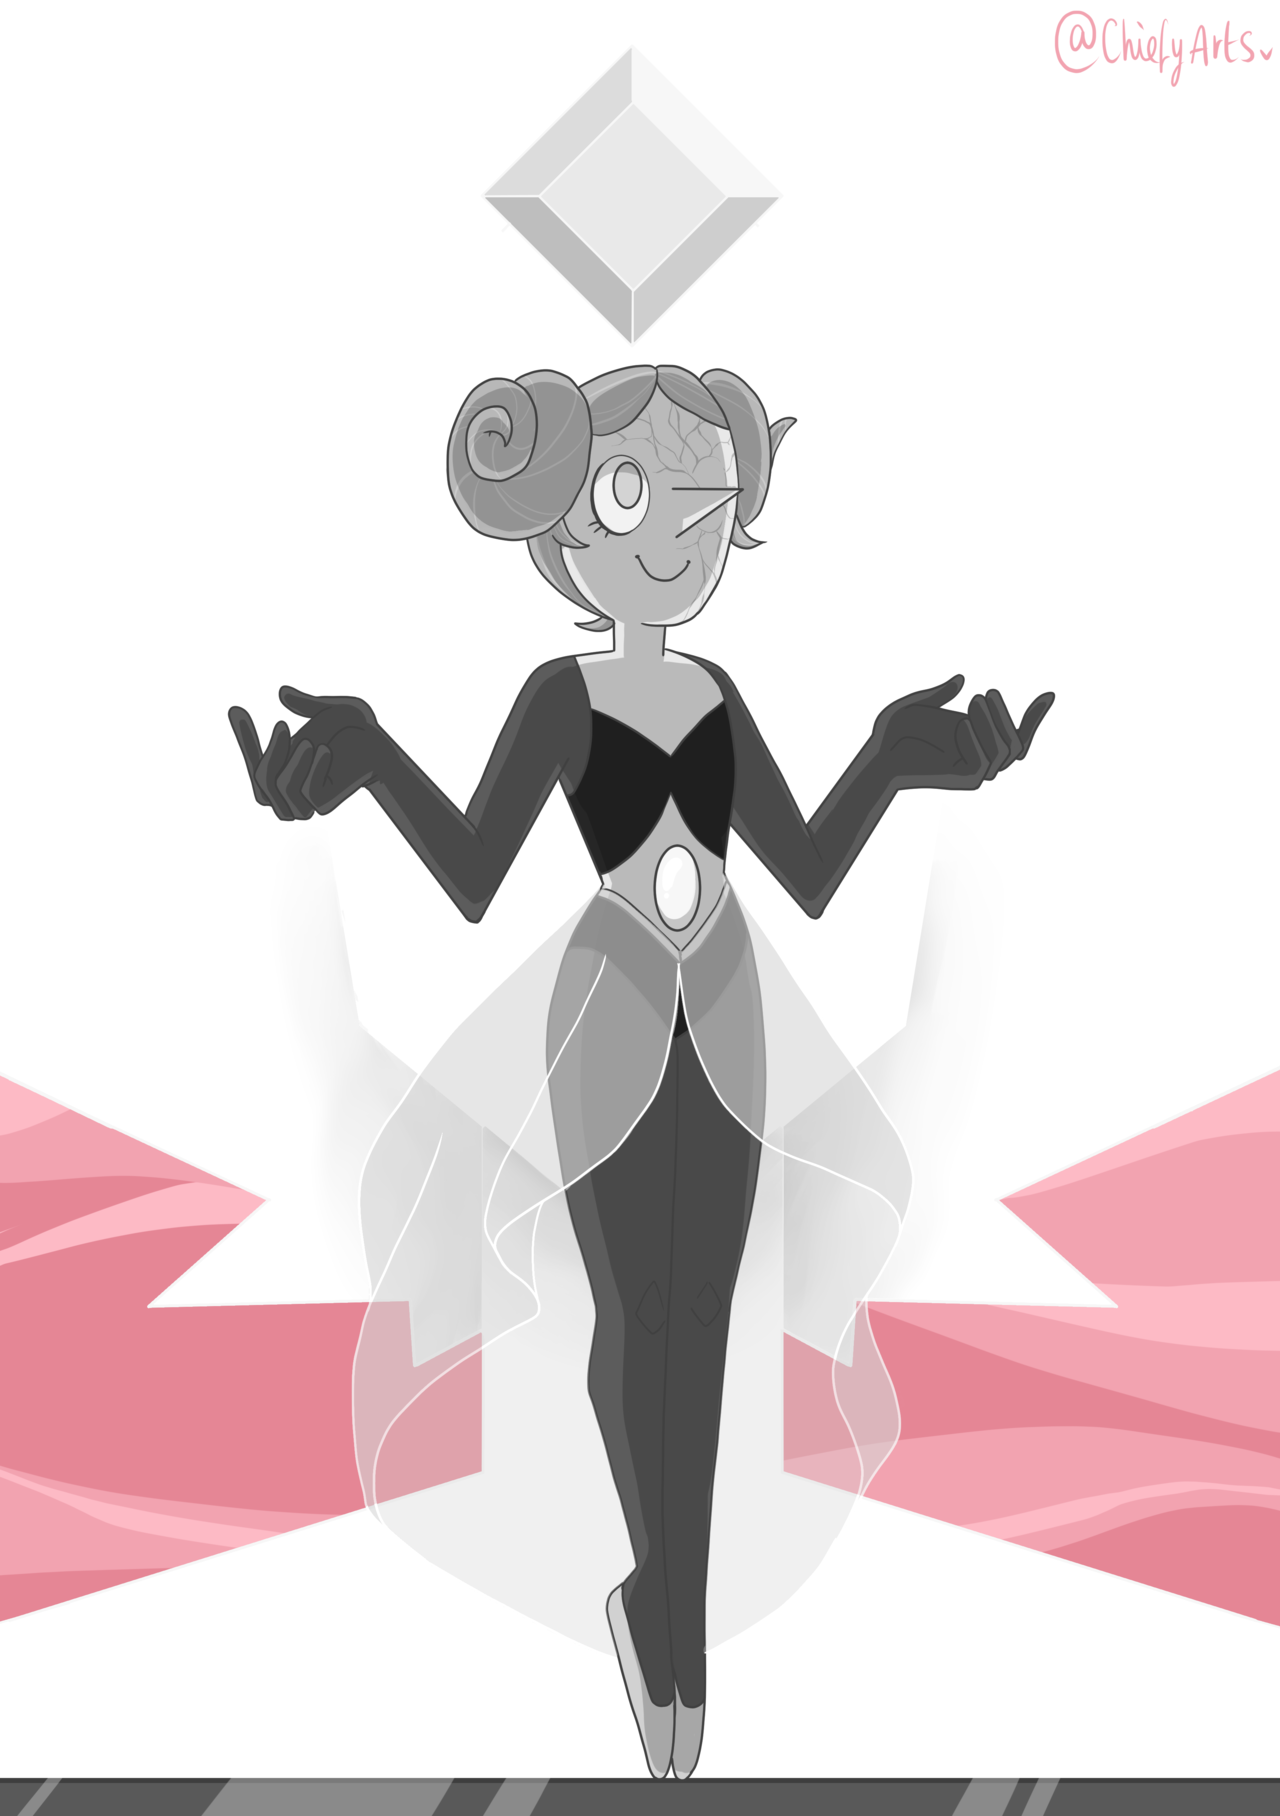 ISOLATEDWhite pearl is finally done! Keep your eyes open, these will hopefully be coming to print soon :D